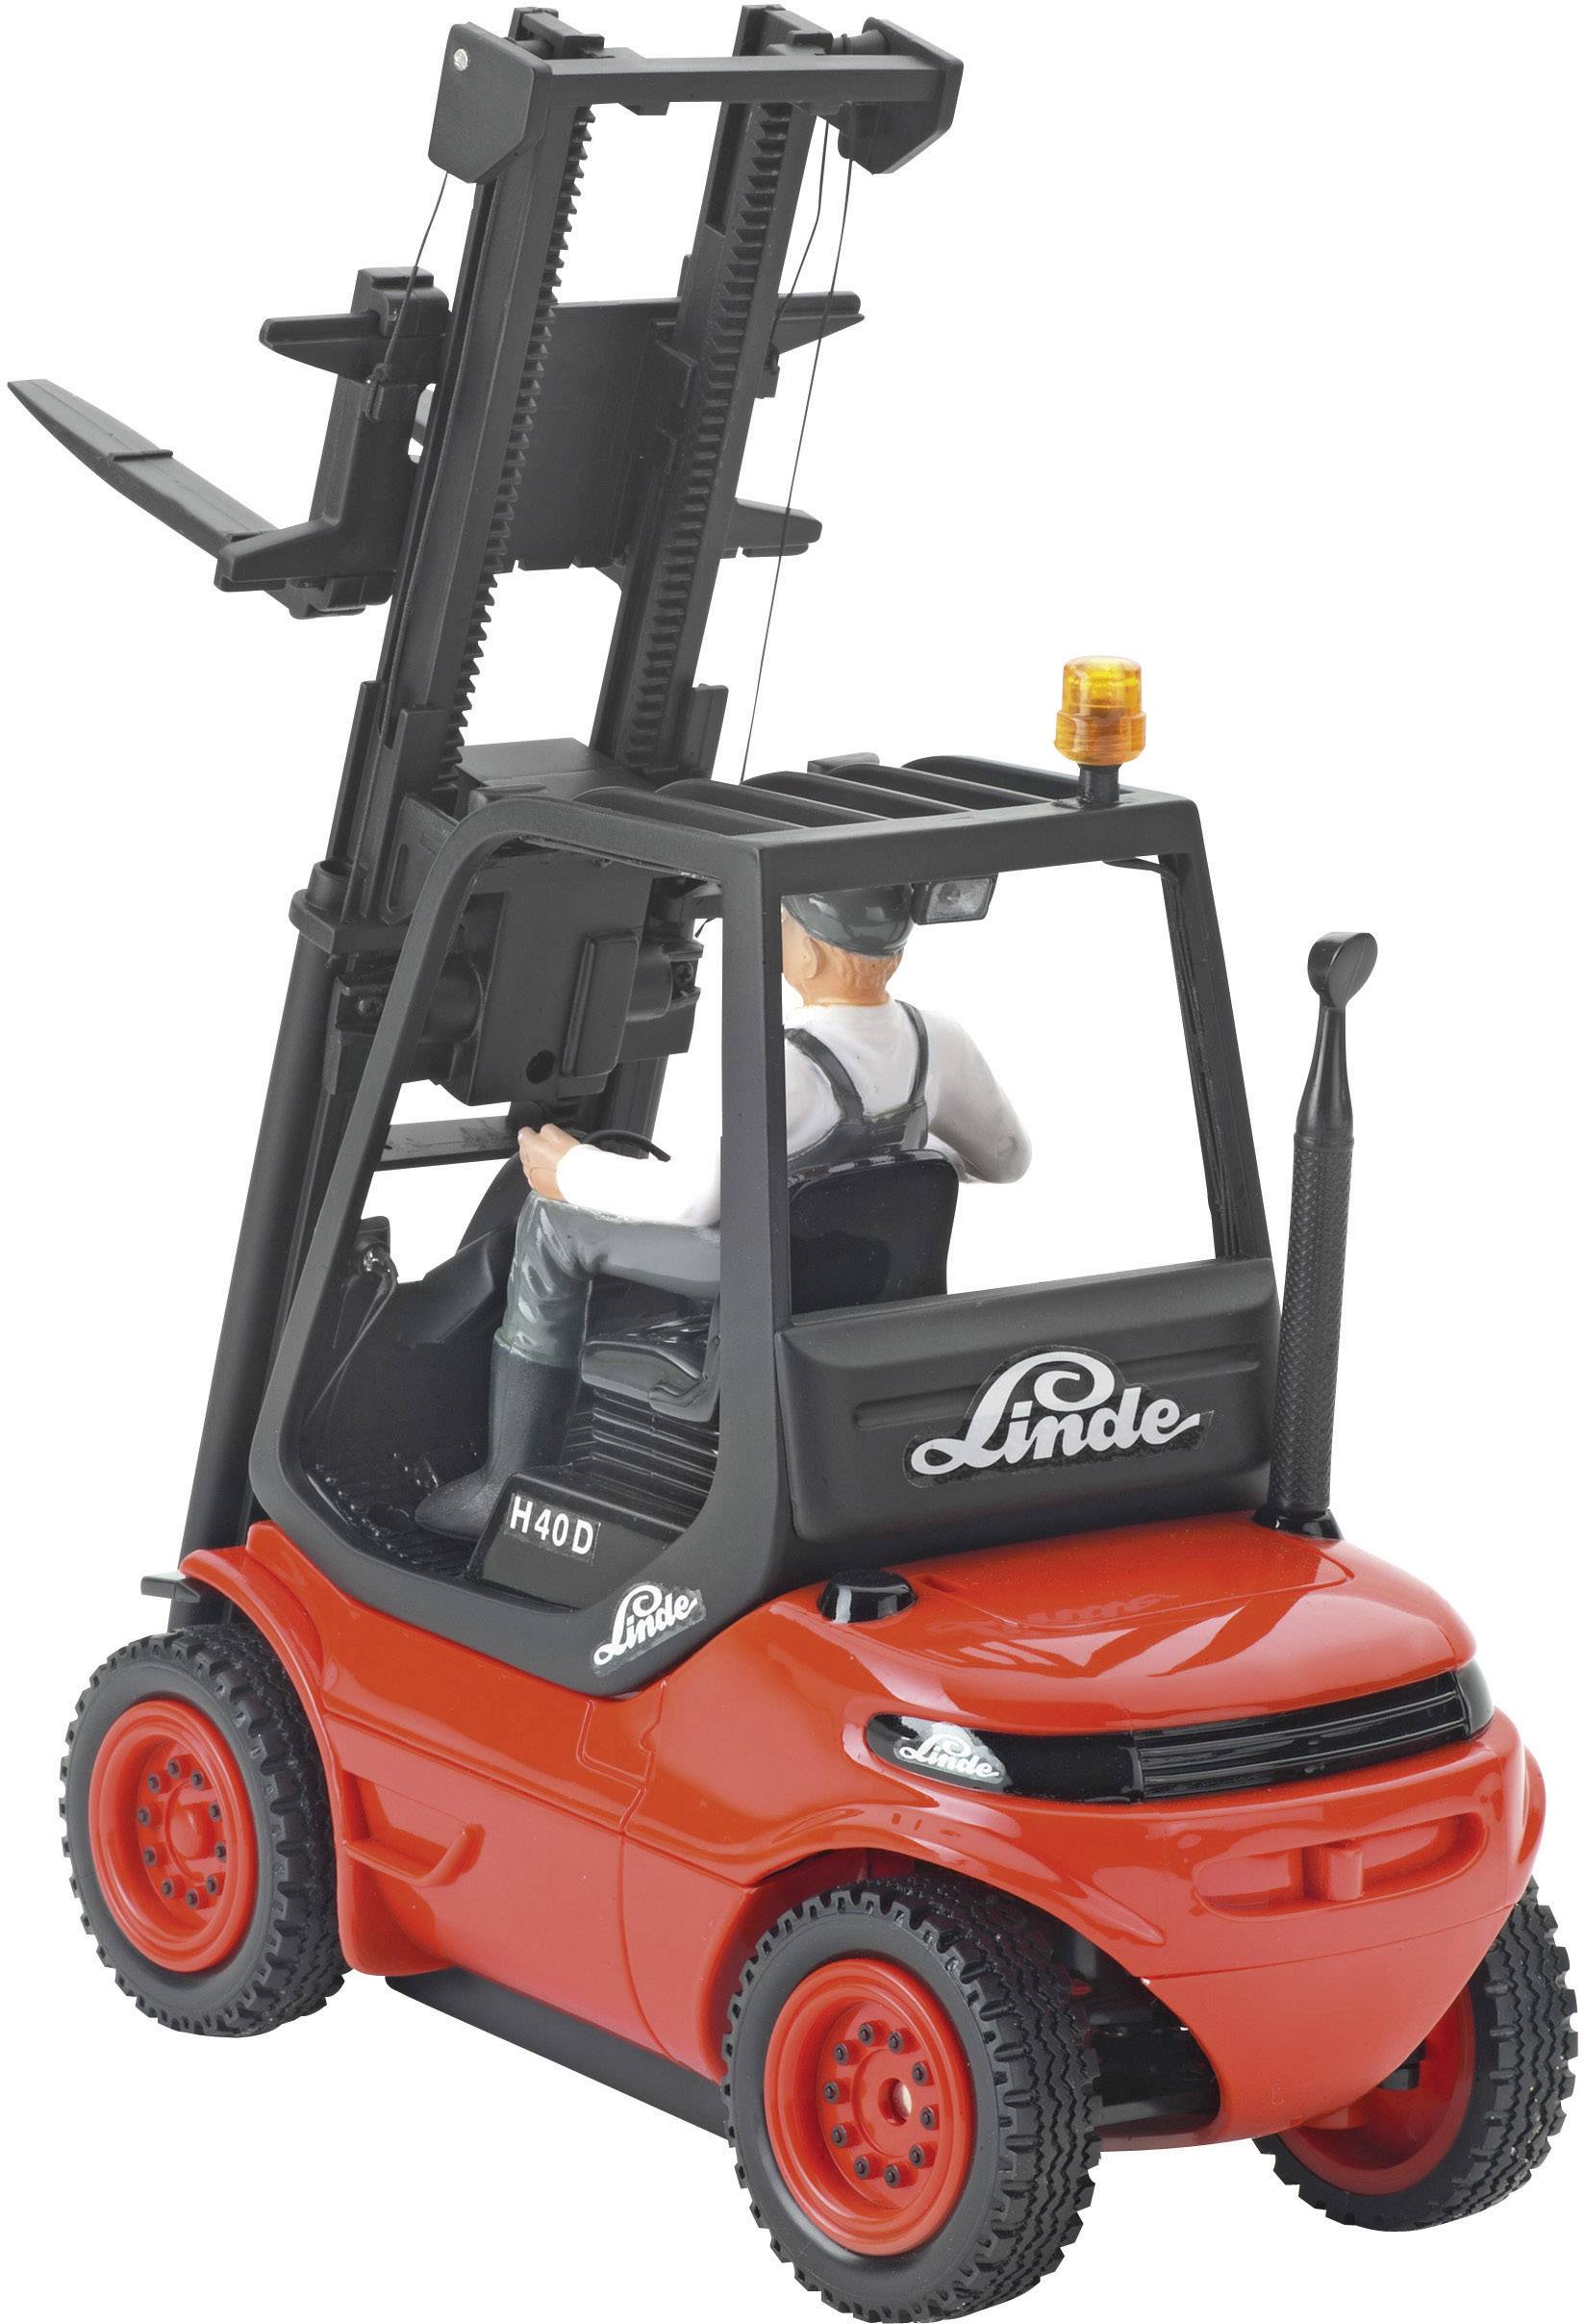 1/14 Scale RC Carson Linde Forklift RTR 2.4ghz 6 ch 